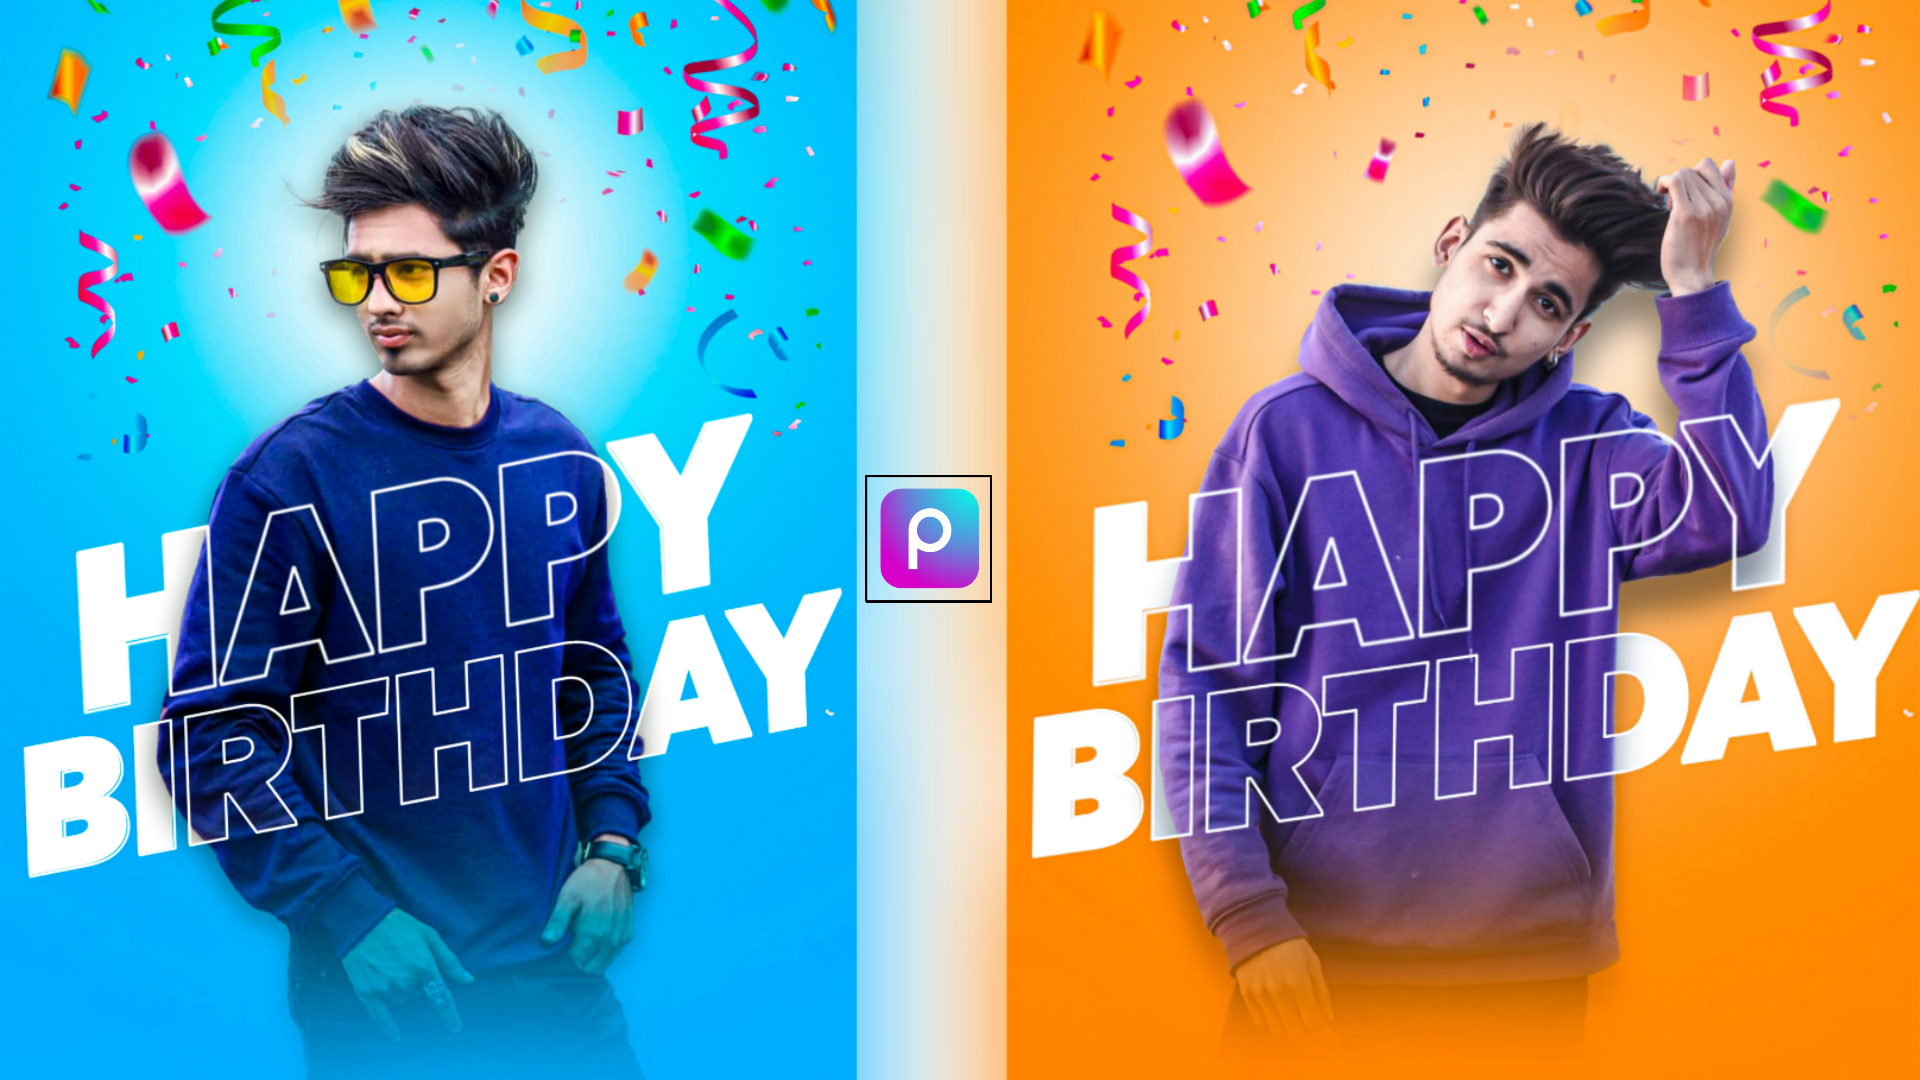 Birthday Background Images For Photo Editing - Infoupdate.org